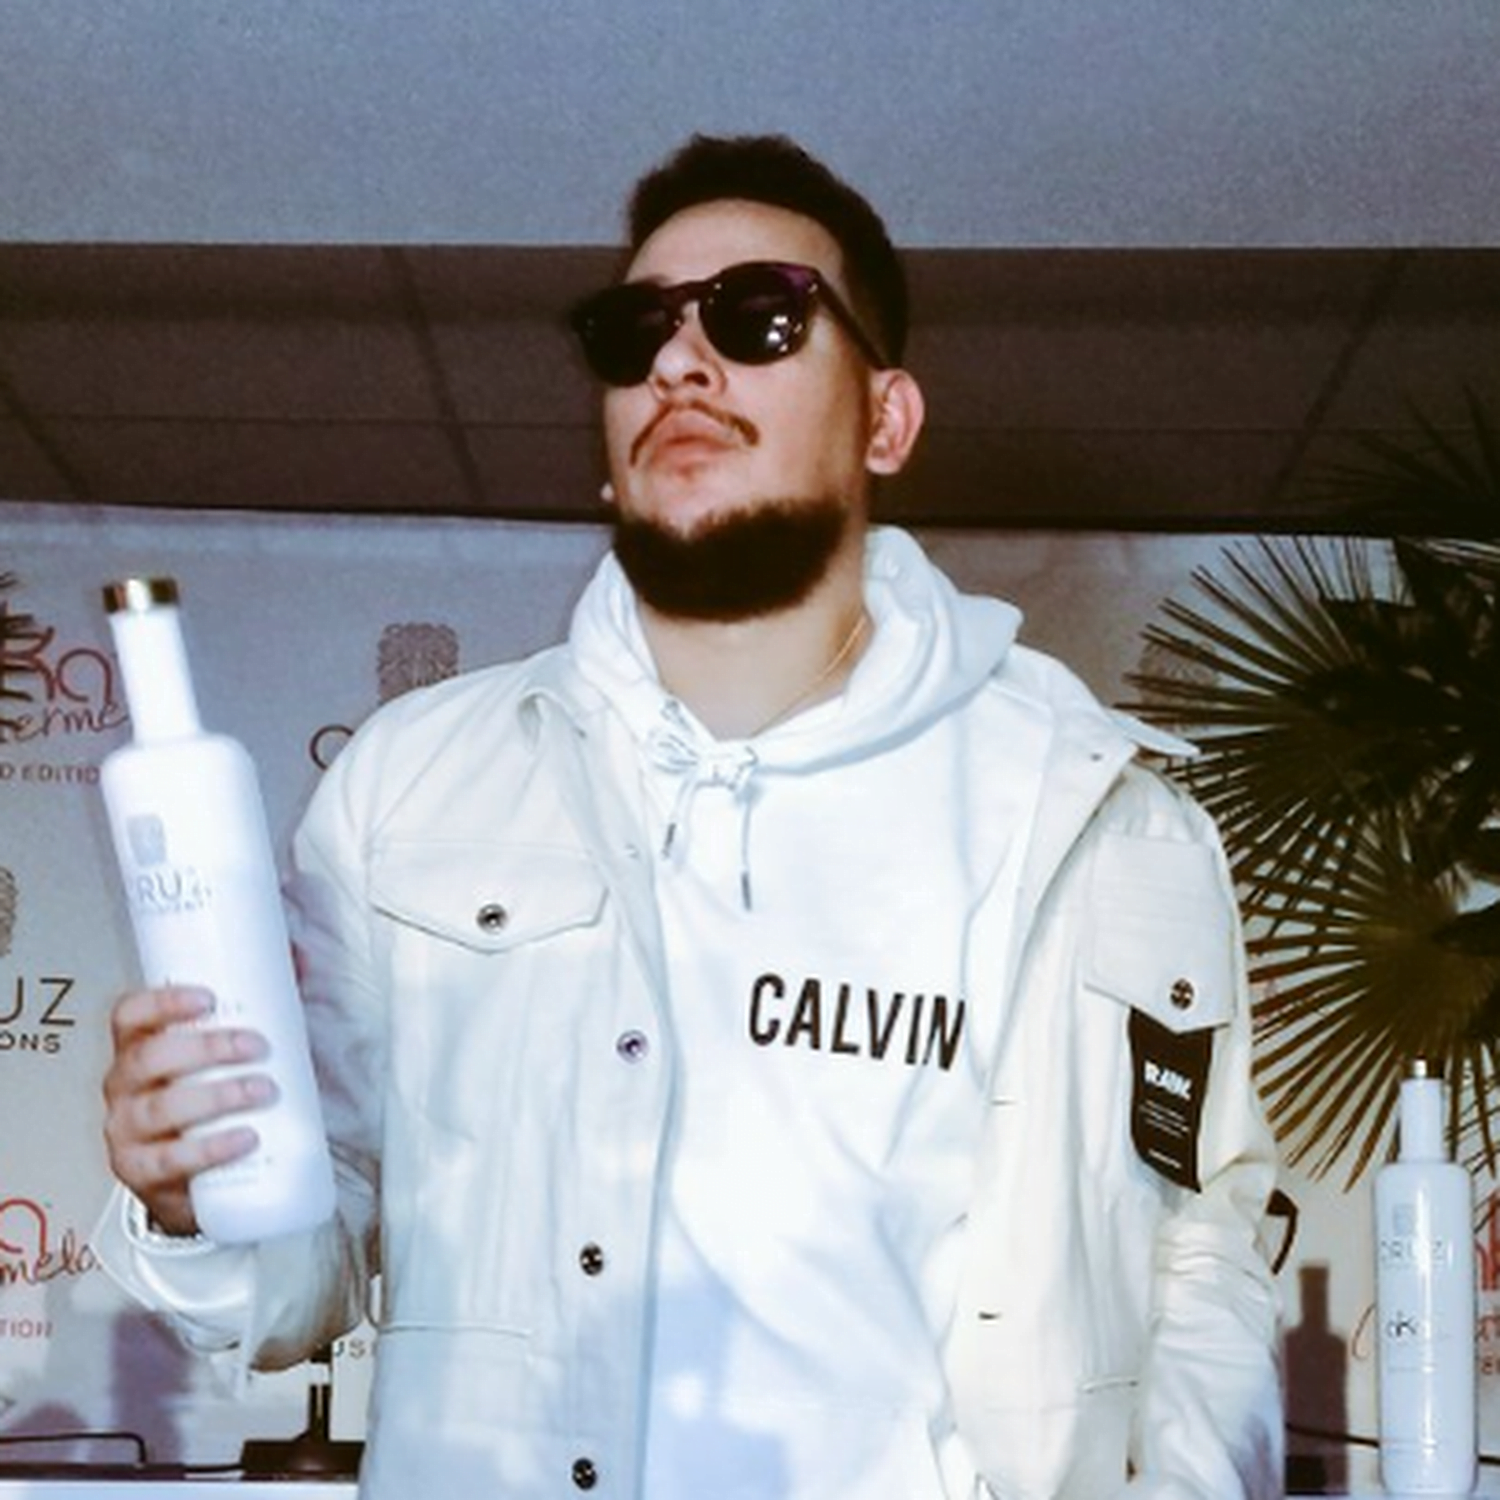 AKA Gets His Name Removed From Cruz Watermelon Bottle